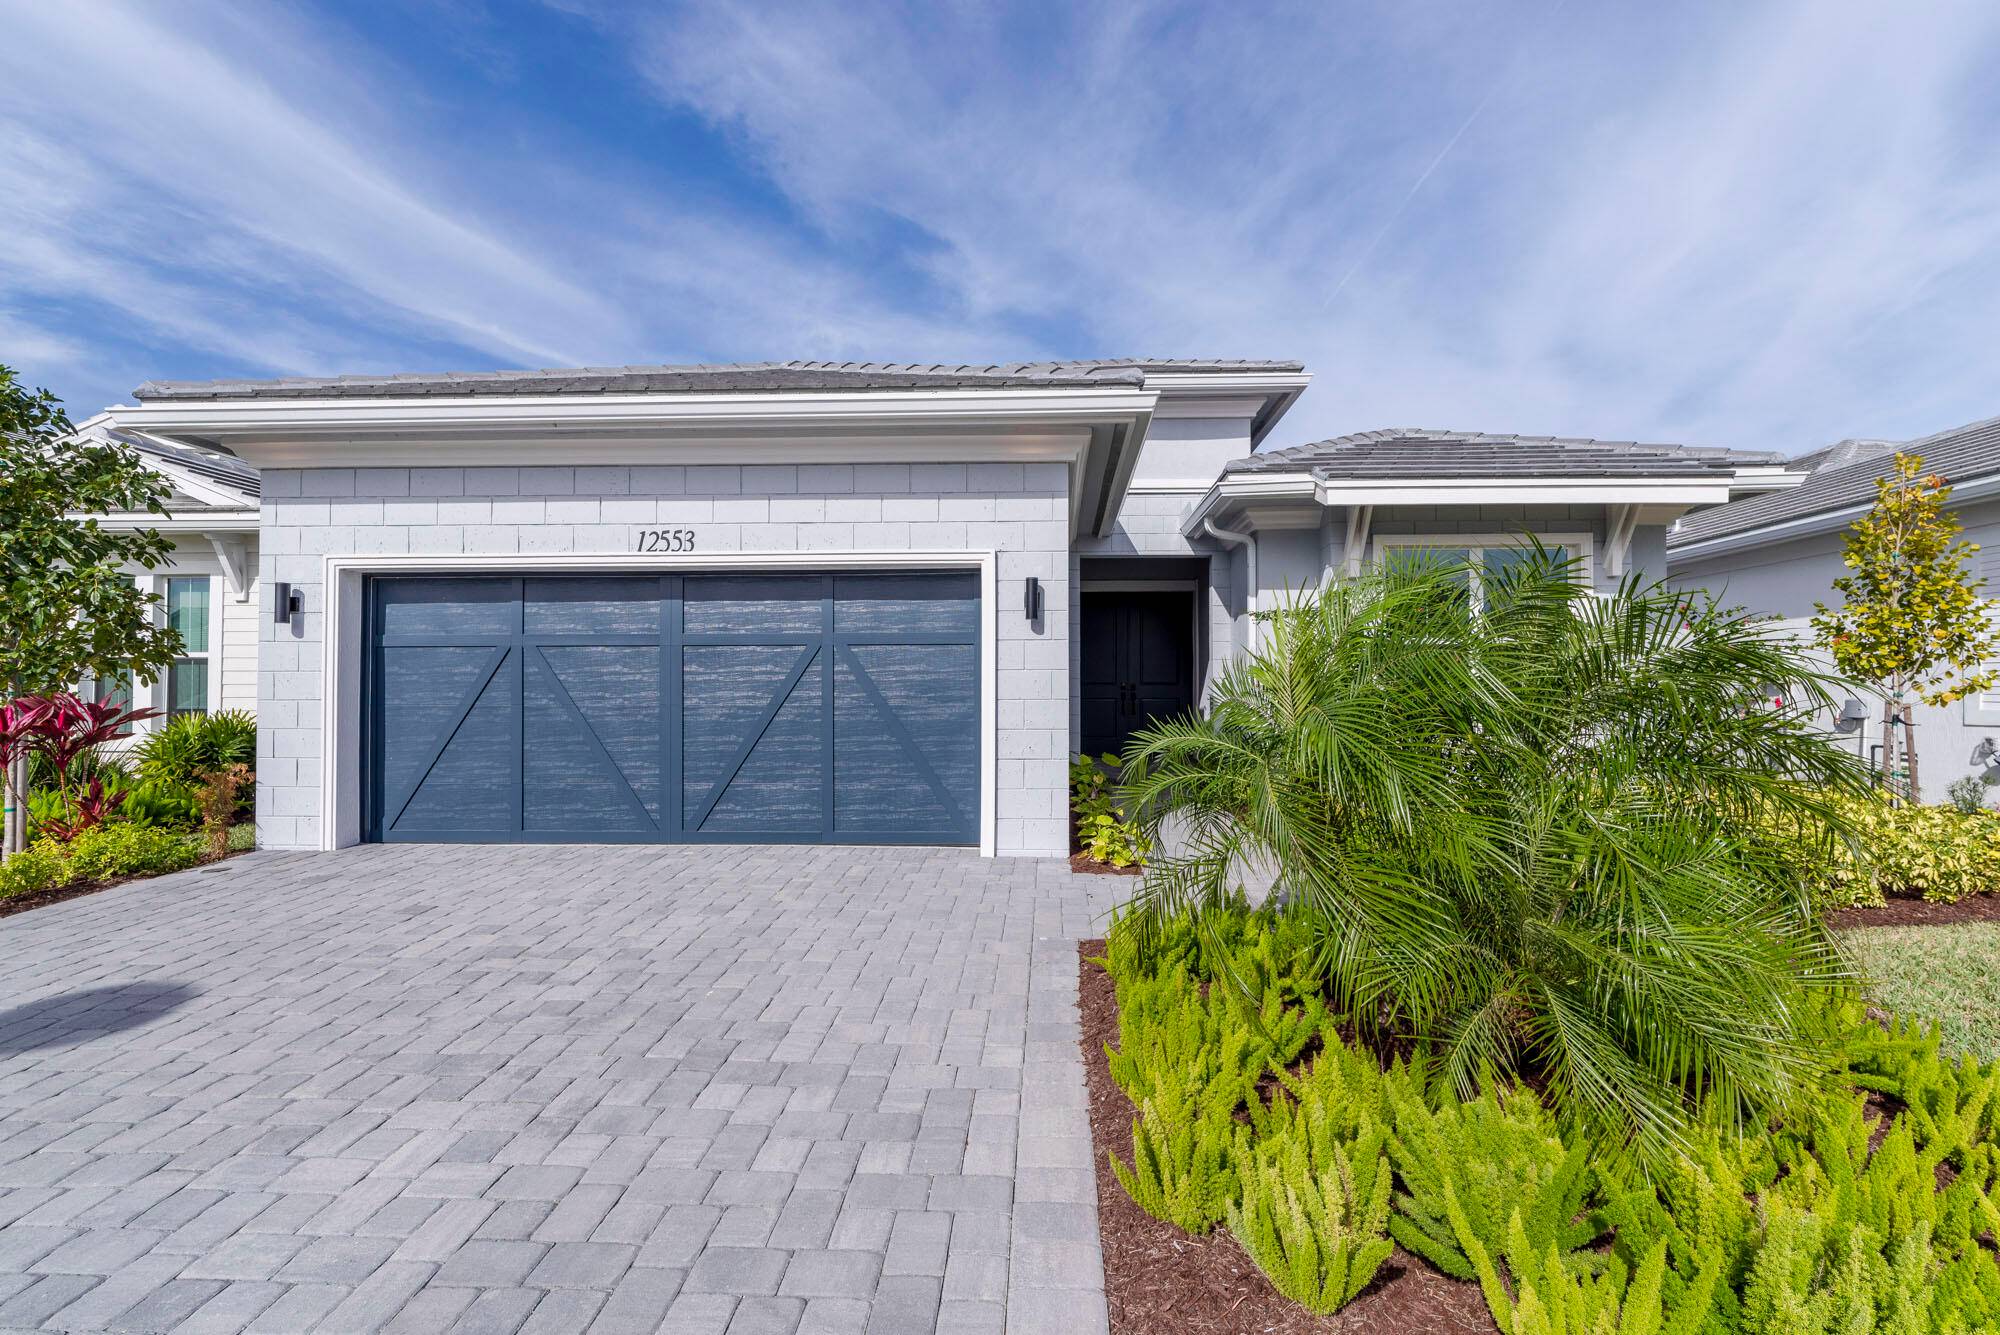 This must see exquisitely appointed newly 2023 built, never lived in home in the sought after gated community of Windgate at Avenir is now available.